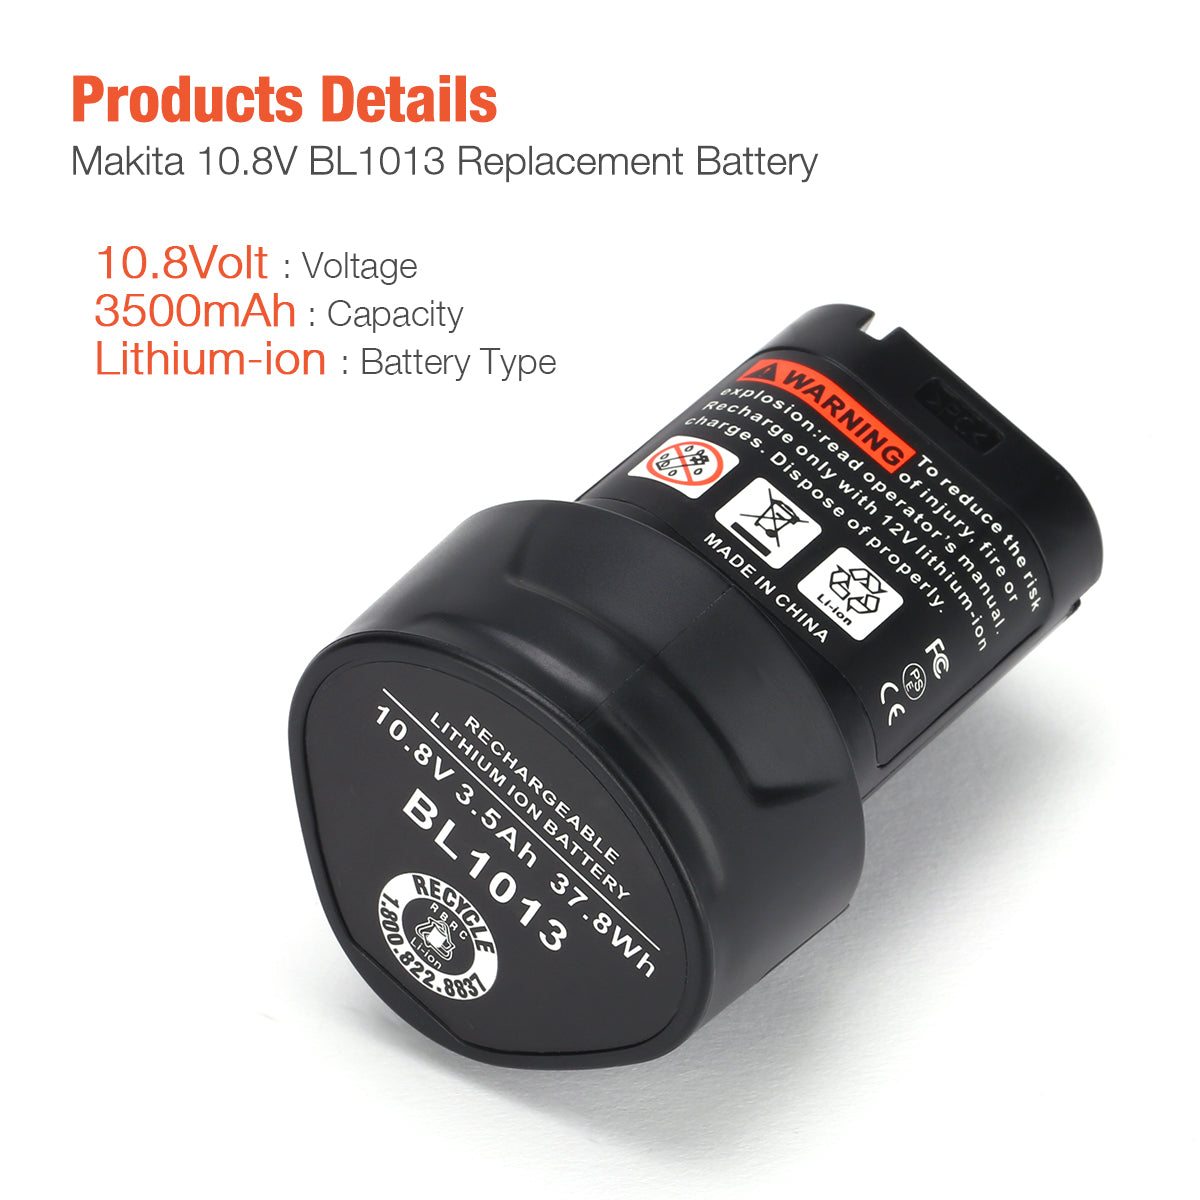 Powerextra 3.6V 2 Pack 3.0Ah Replacement Battery for Black&Decker